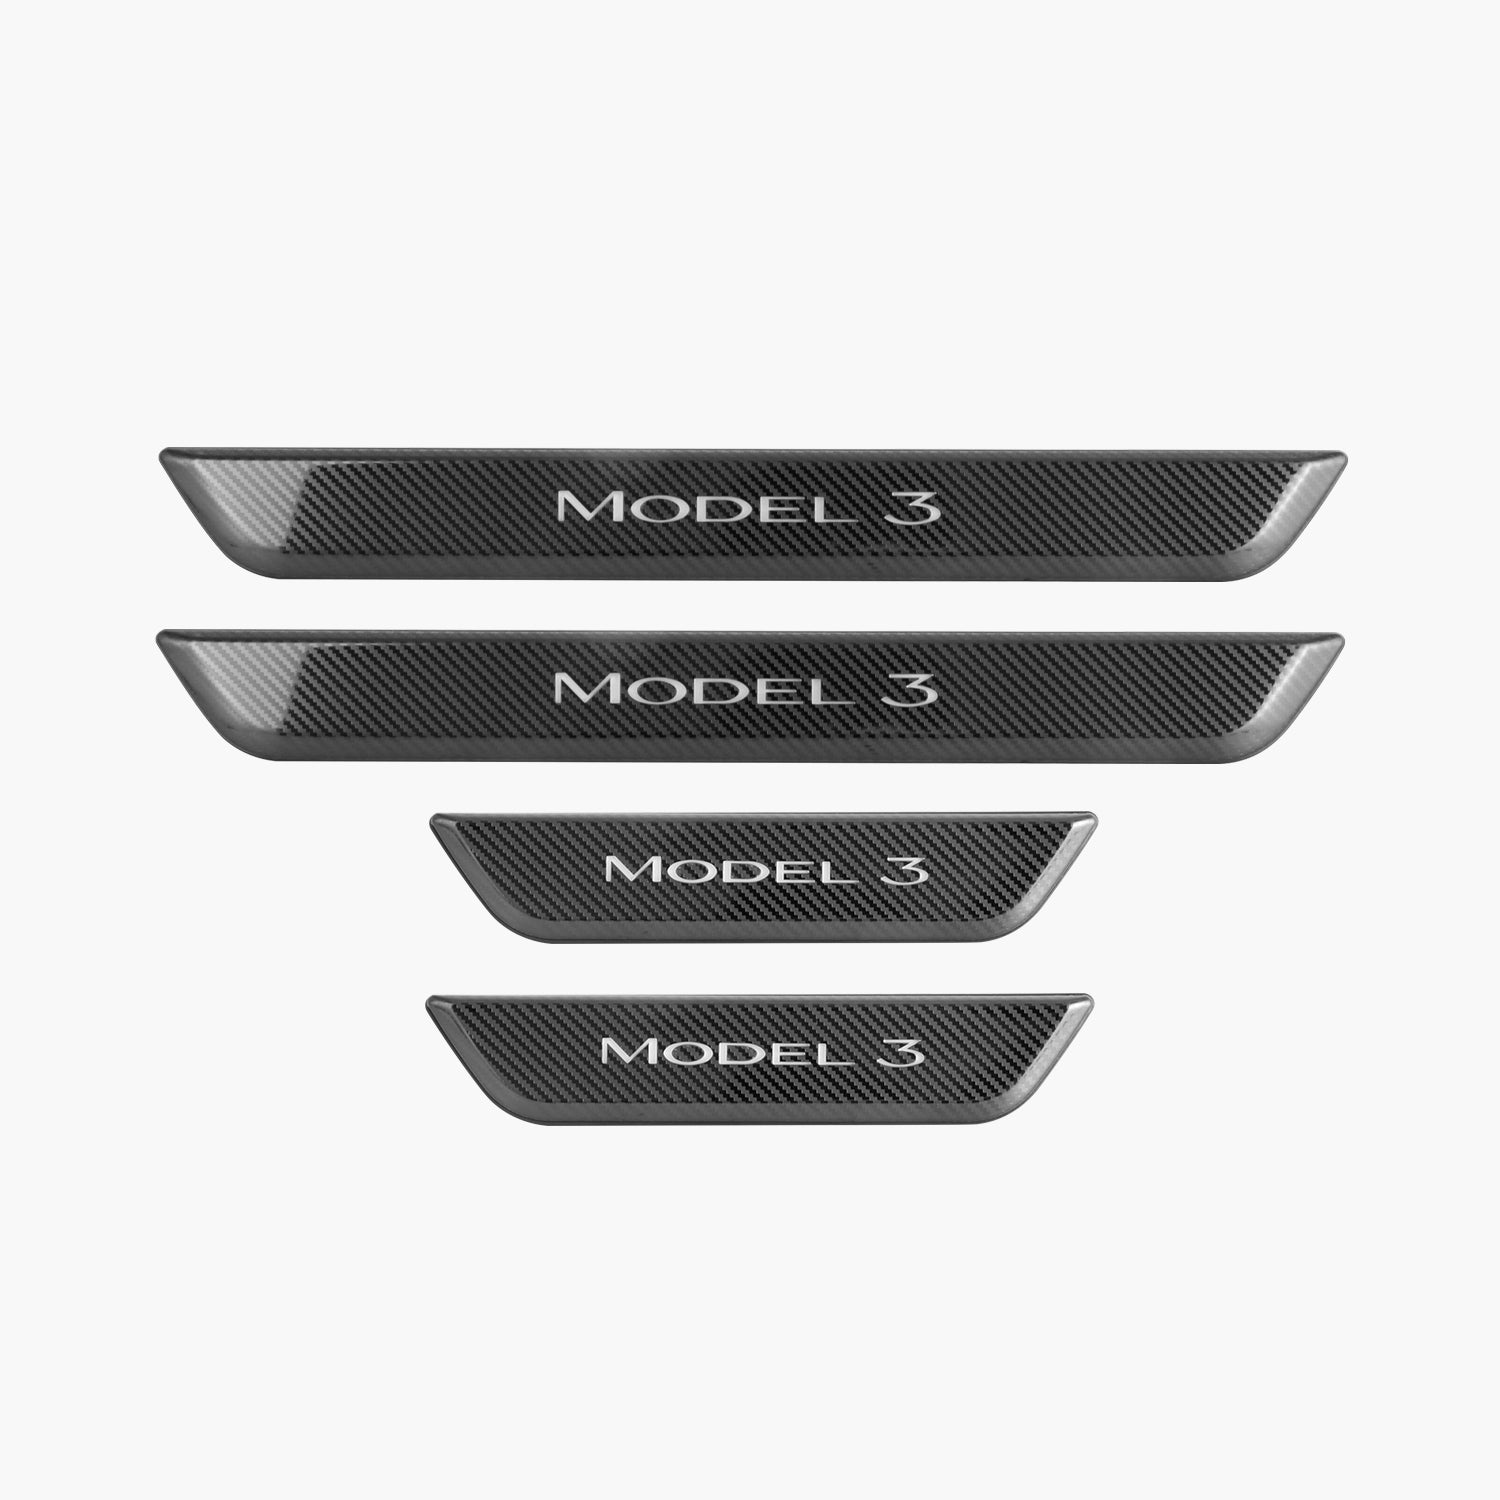 Carbon Fiber Threshold Strip For Tesla Model 3 Door Sill Strip Protector  Stickers Welcome Pedal Decoration Car - buy Carbon Fiber Threshold Strip  For Tesla Model 3 Door Sill Strip Protector Stickers